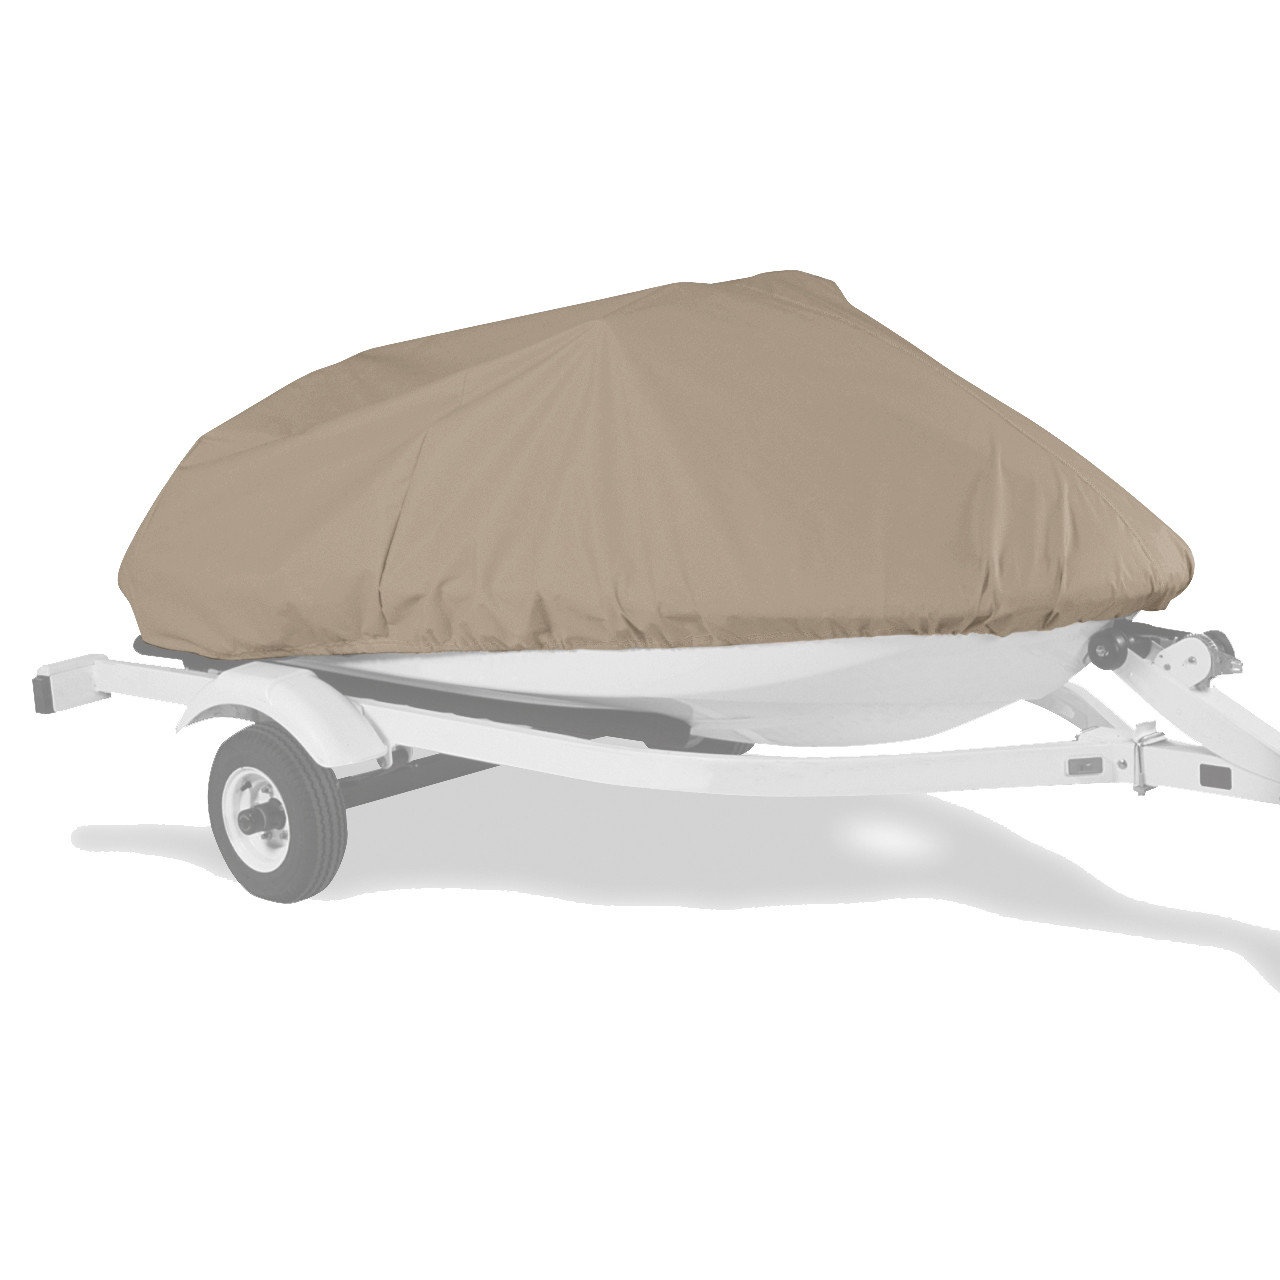 Personal Water Craft Boat Cover 11' 10